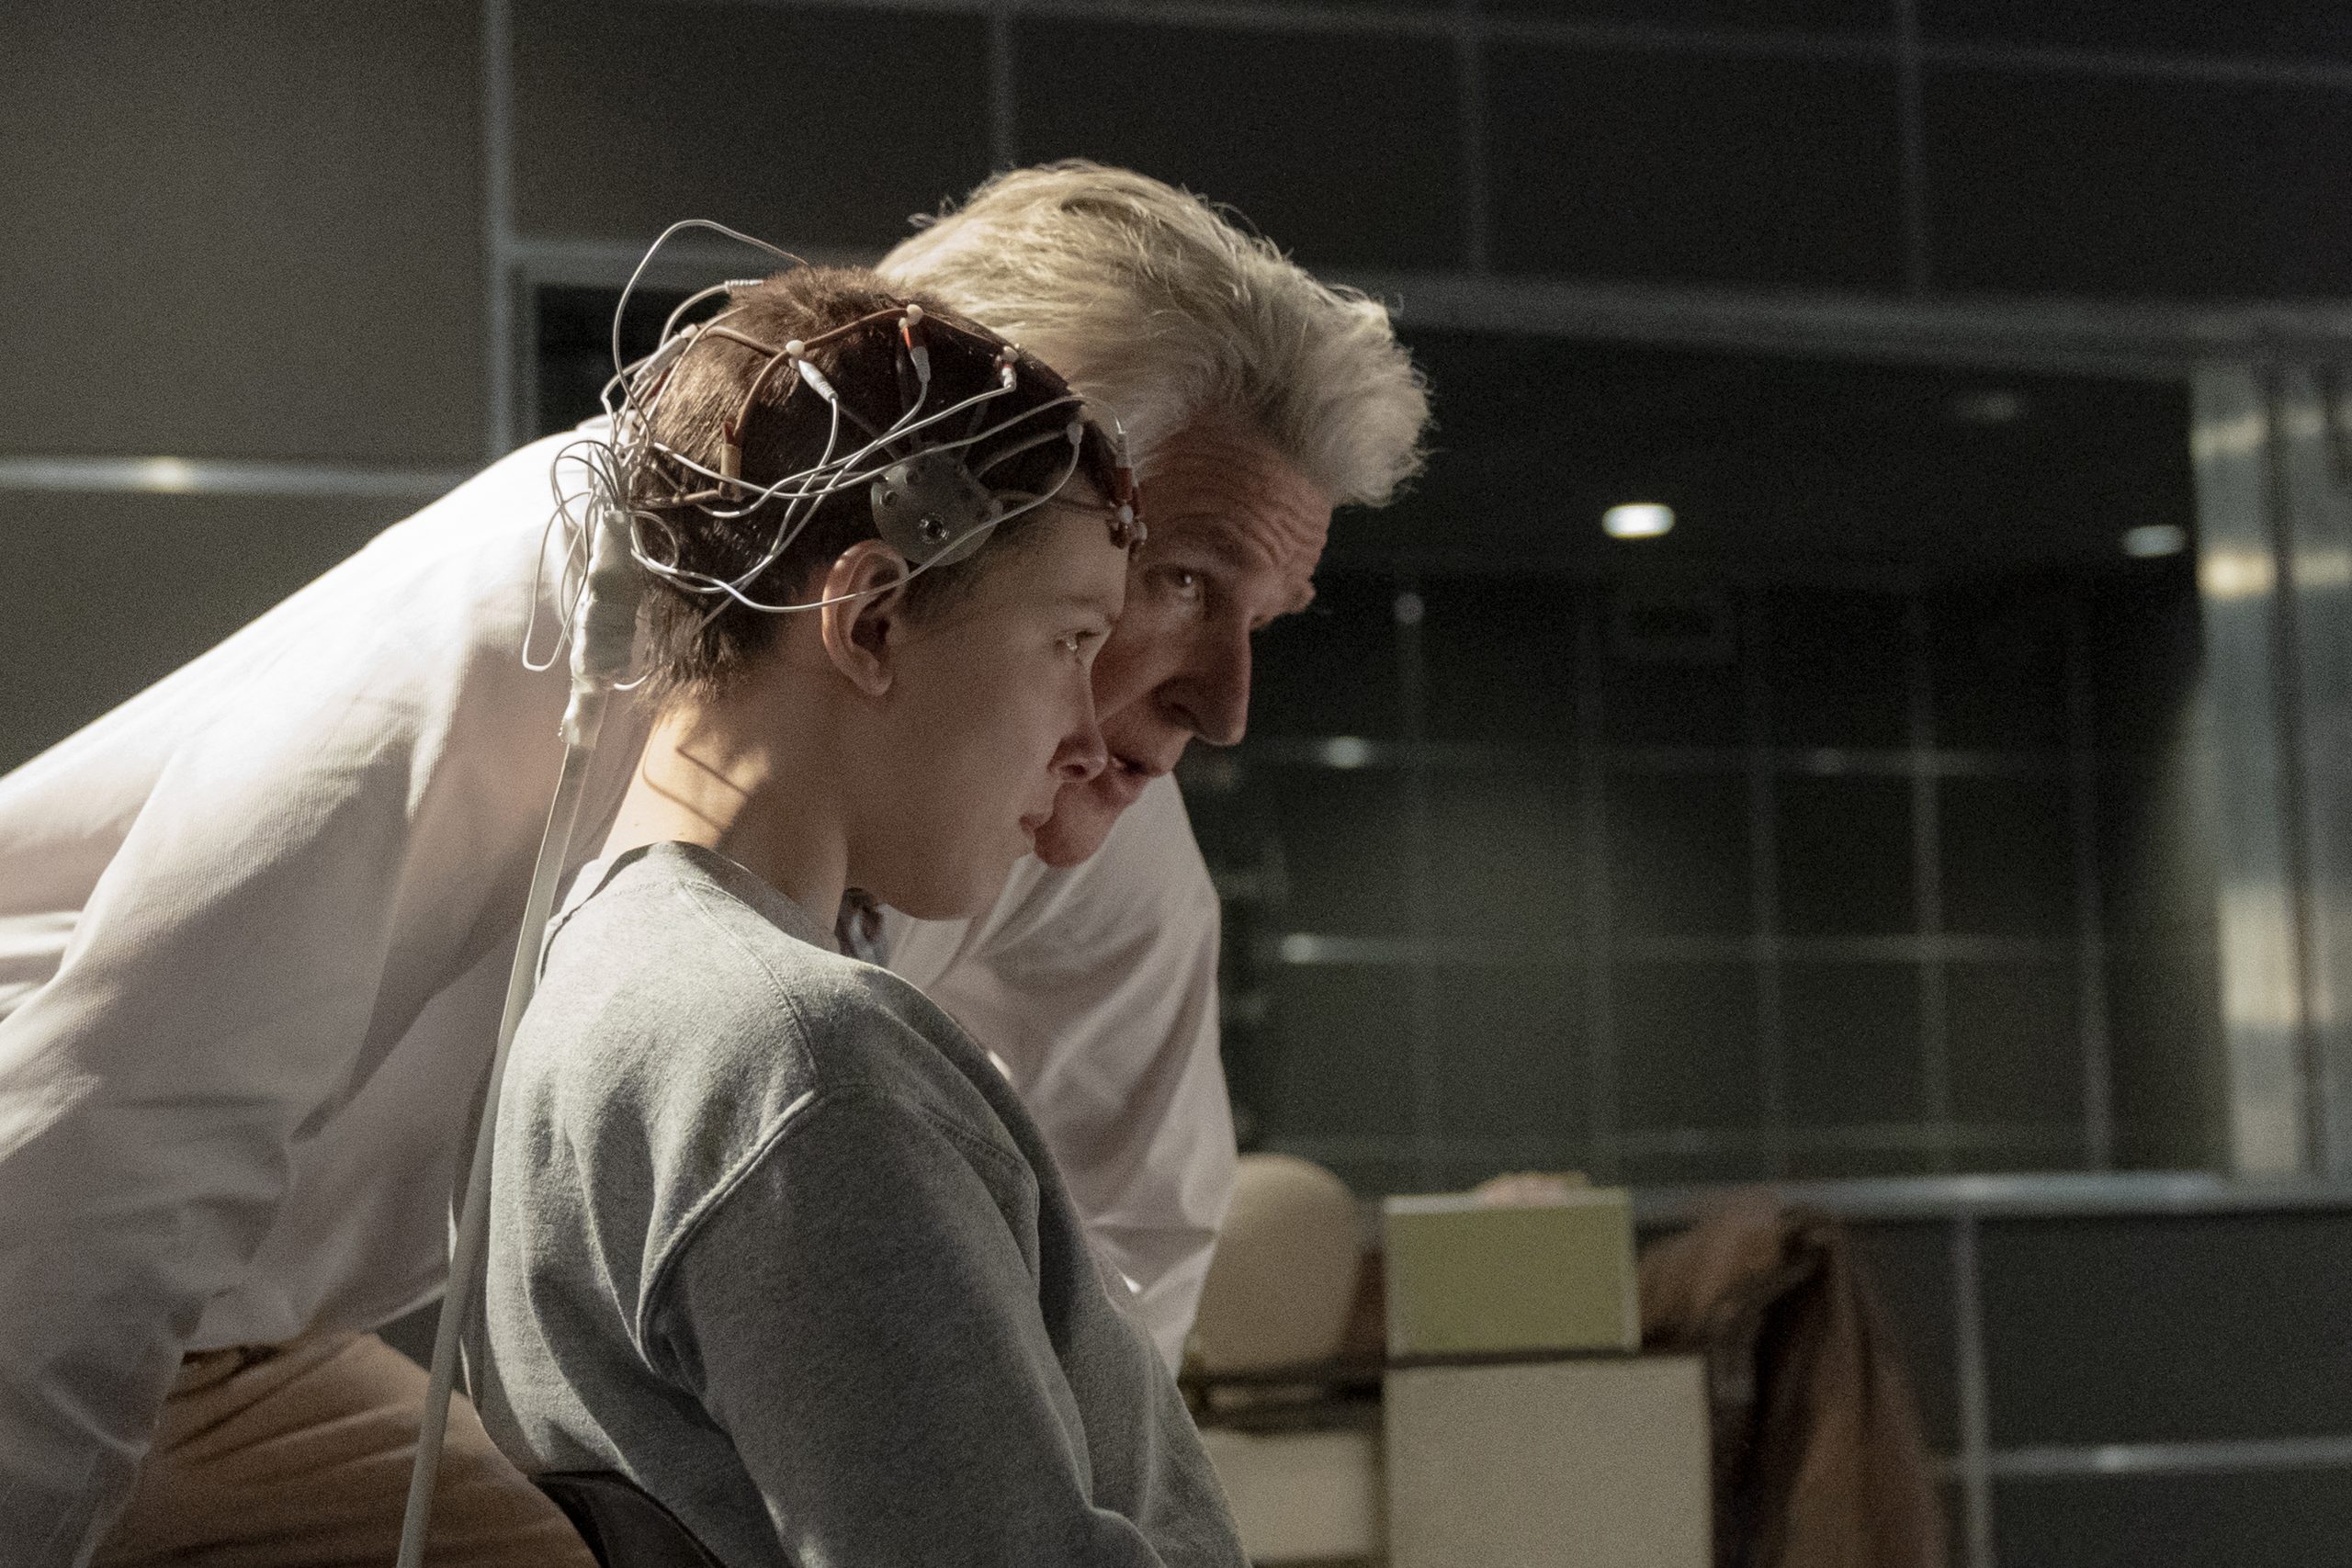 STRANGER THINGS. (L to R) Millie Bobby Brown as Eleven and Matthew Modine as Dr. Martin Brenner in STRANGER THINGS. Cr. Tina Rowden/Netflix © 2022